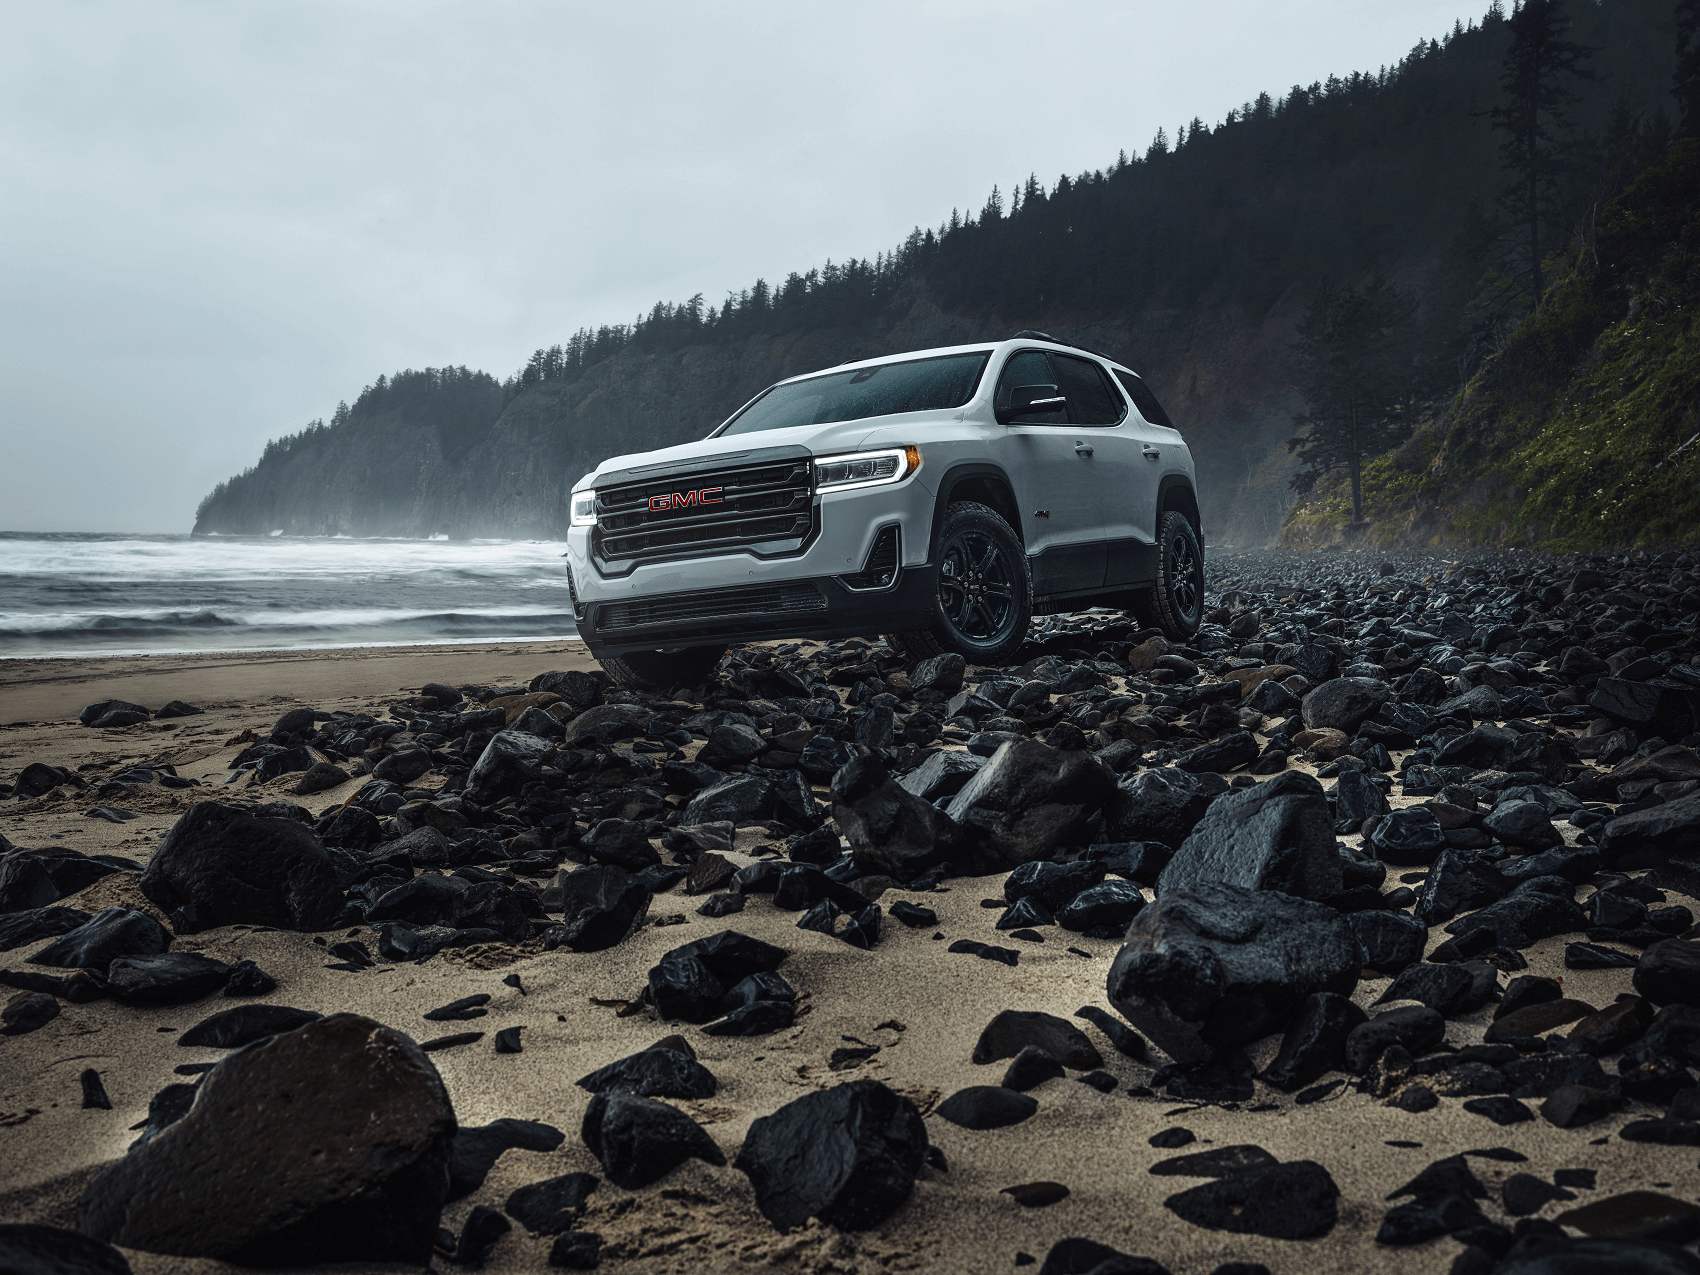 2021 GMC Acadia Review Fishers IN
